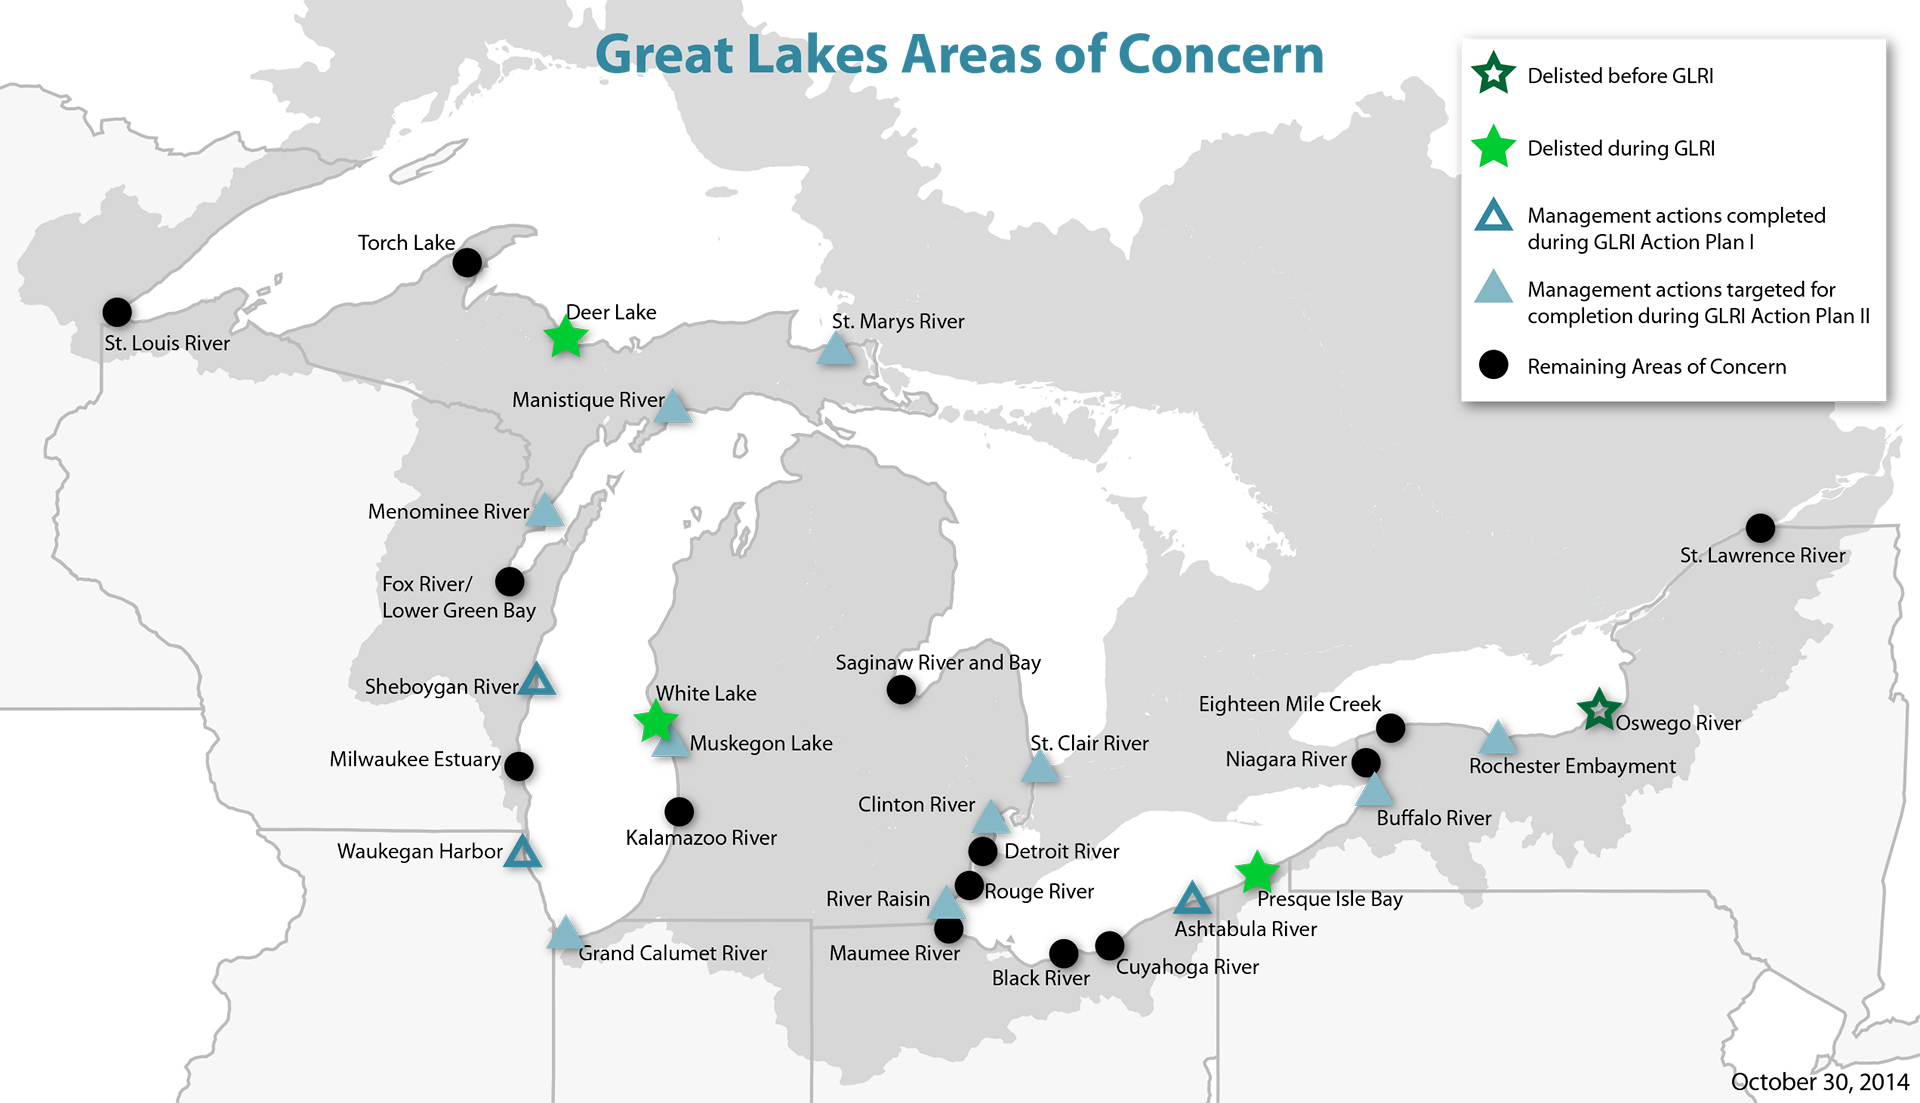 A map shows Great Lakes Areas of Concern, with different locations indicated by their listing status and management actions.